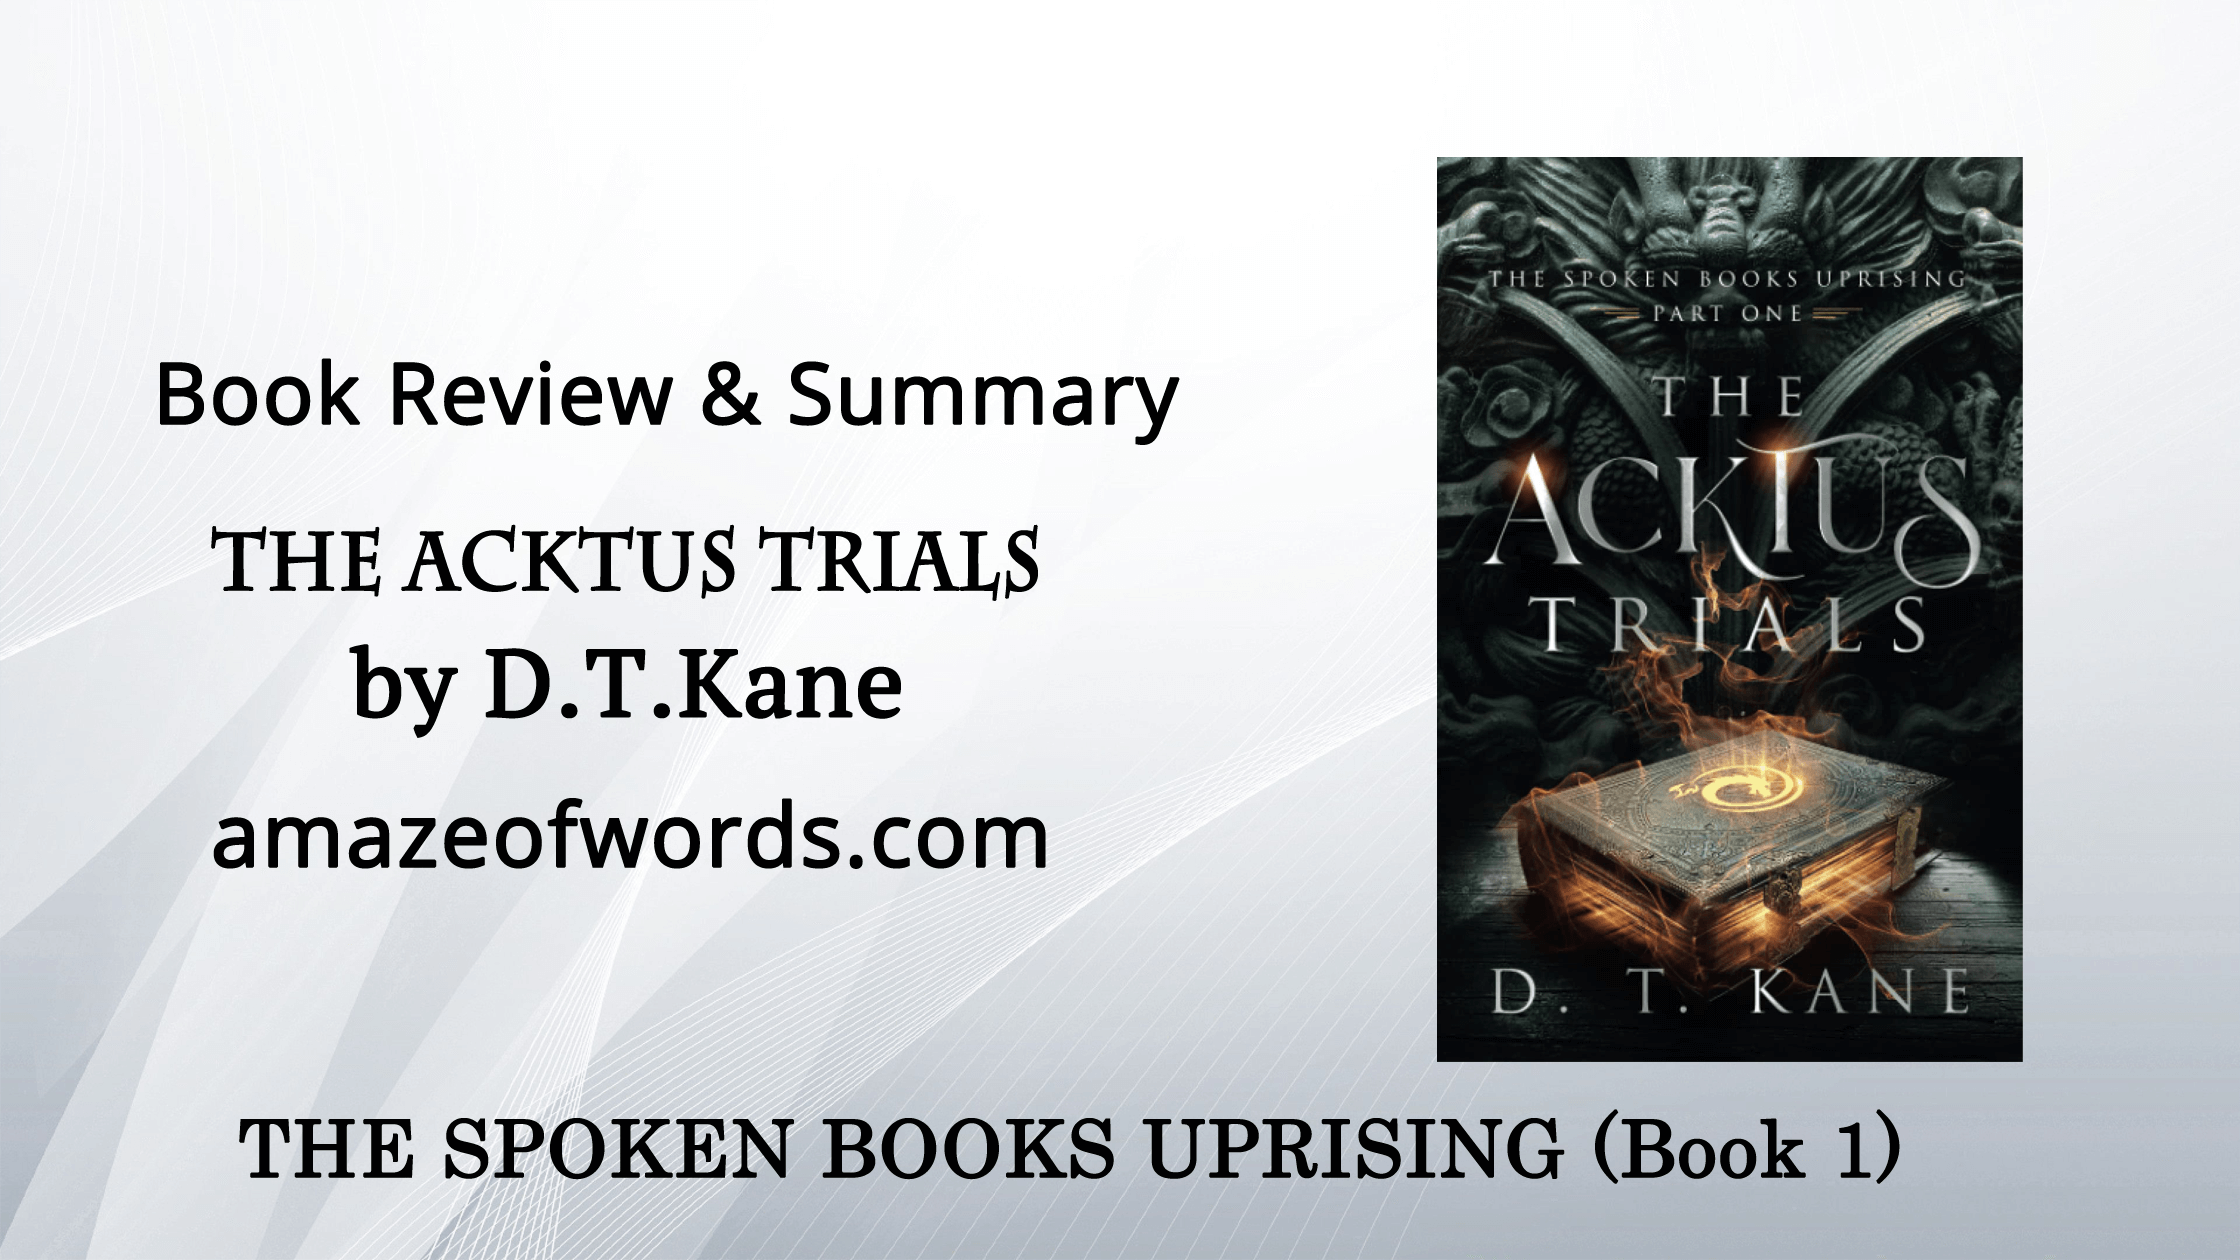 The Acktus Trials by D.T.Kane — Book Review & Summary